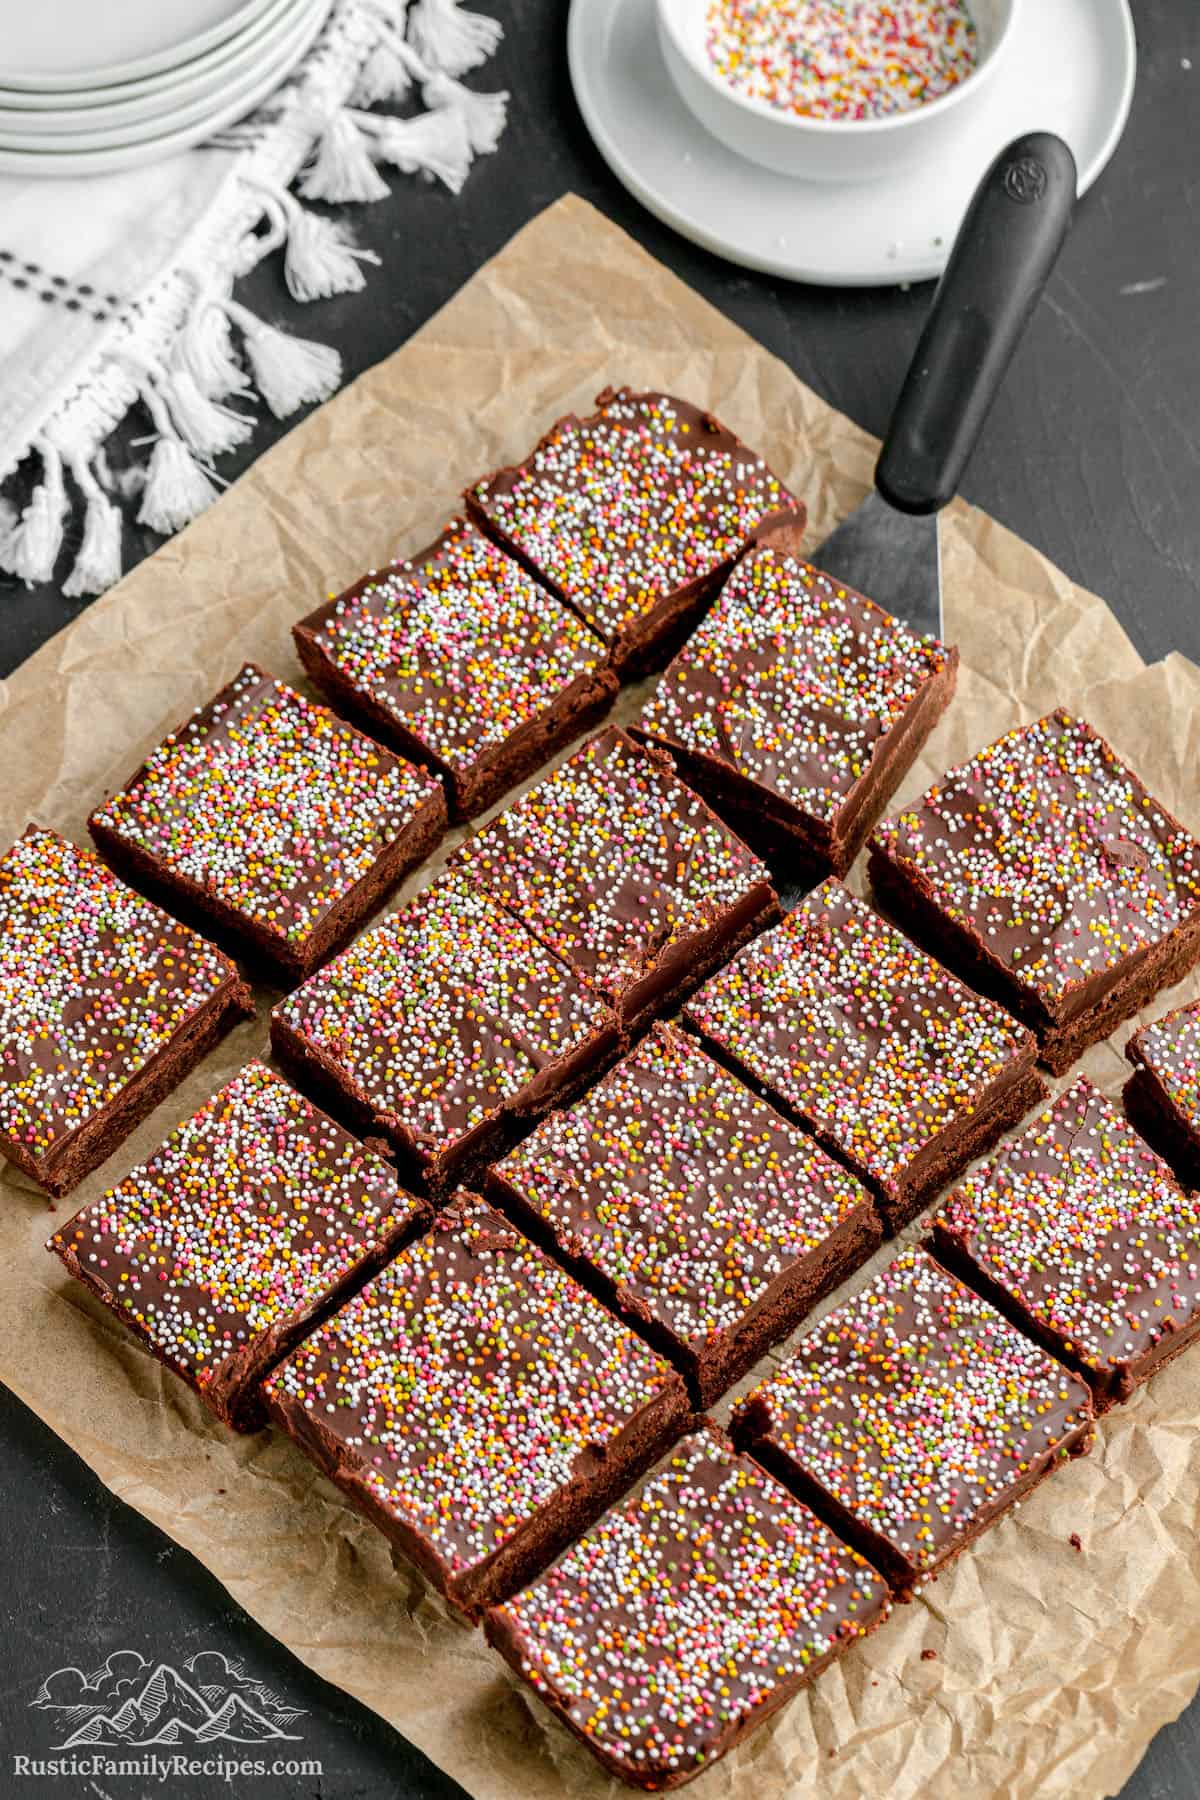 A batch of nearly cosmic brownies on top of a sheet of parchment paper